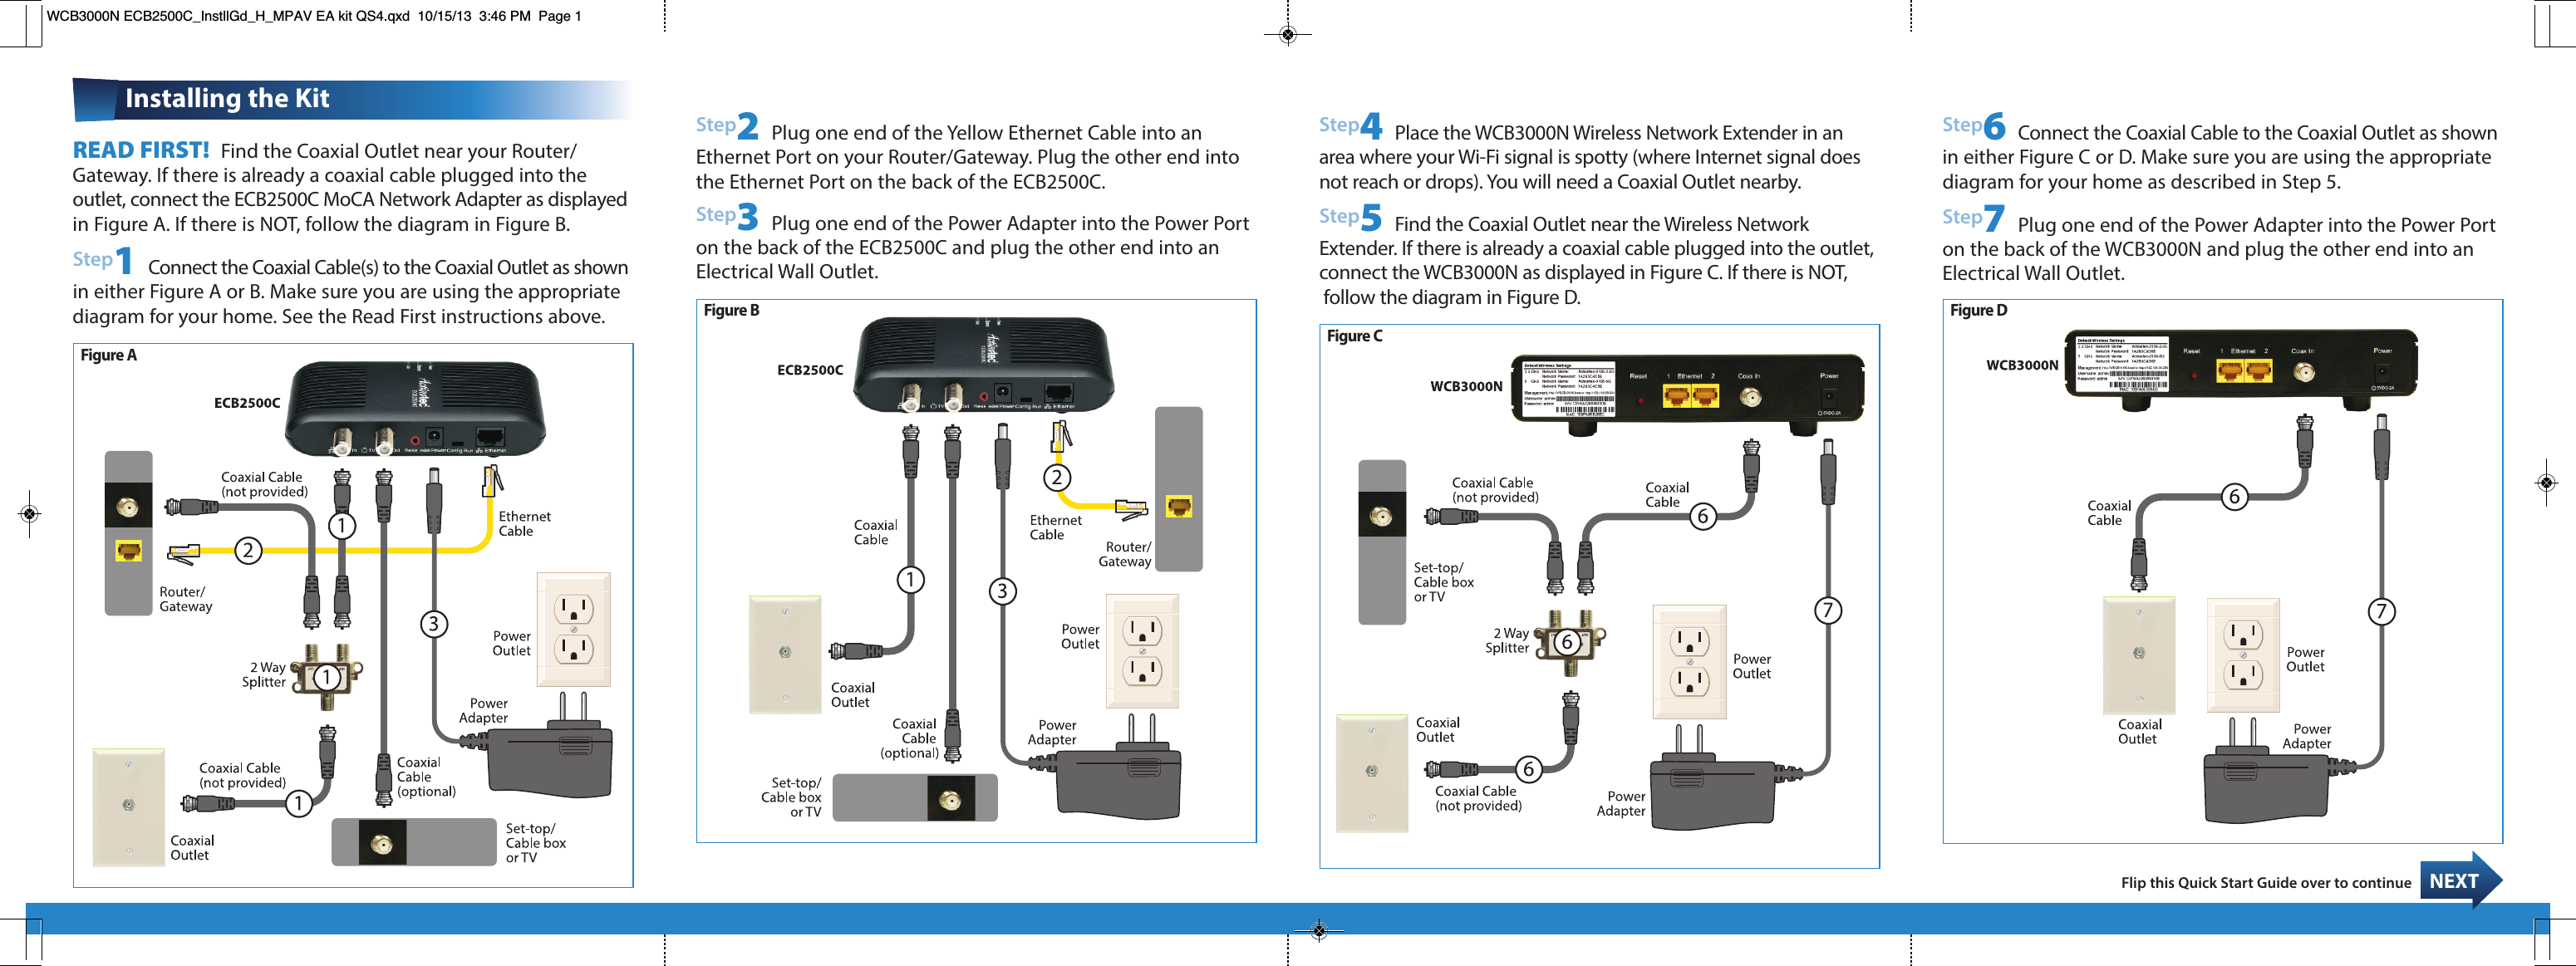 Page 1 of 2 - Actiontec Actiontec-Wcb3000N-Quick-Start-Guide Wireless Network Extender WCB3000N Kit Quick Start Guide